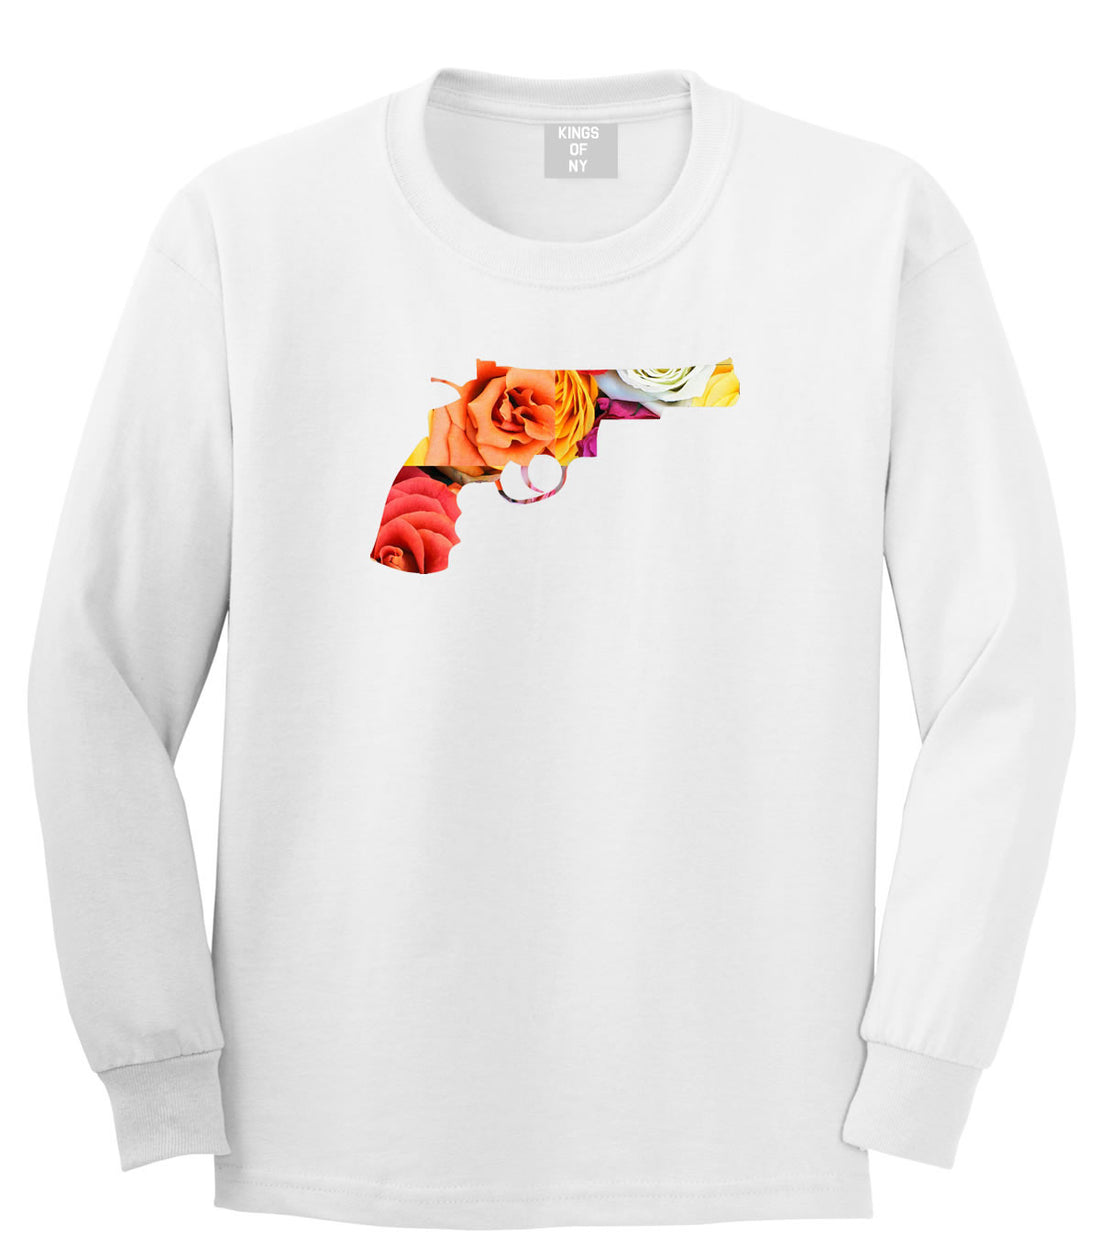 Floral Gun Flower Print Colt 45 Revolver Long Sleeve T-Shirt in White by Kings Of NY